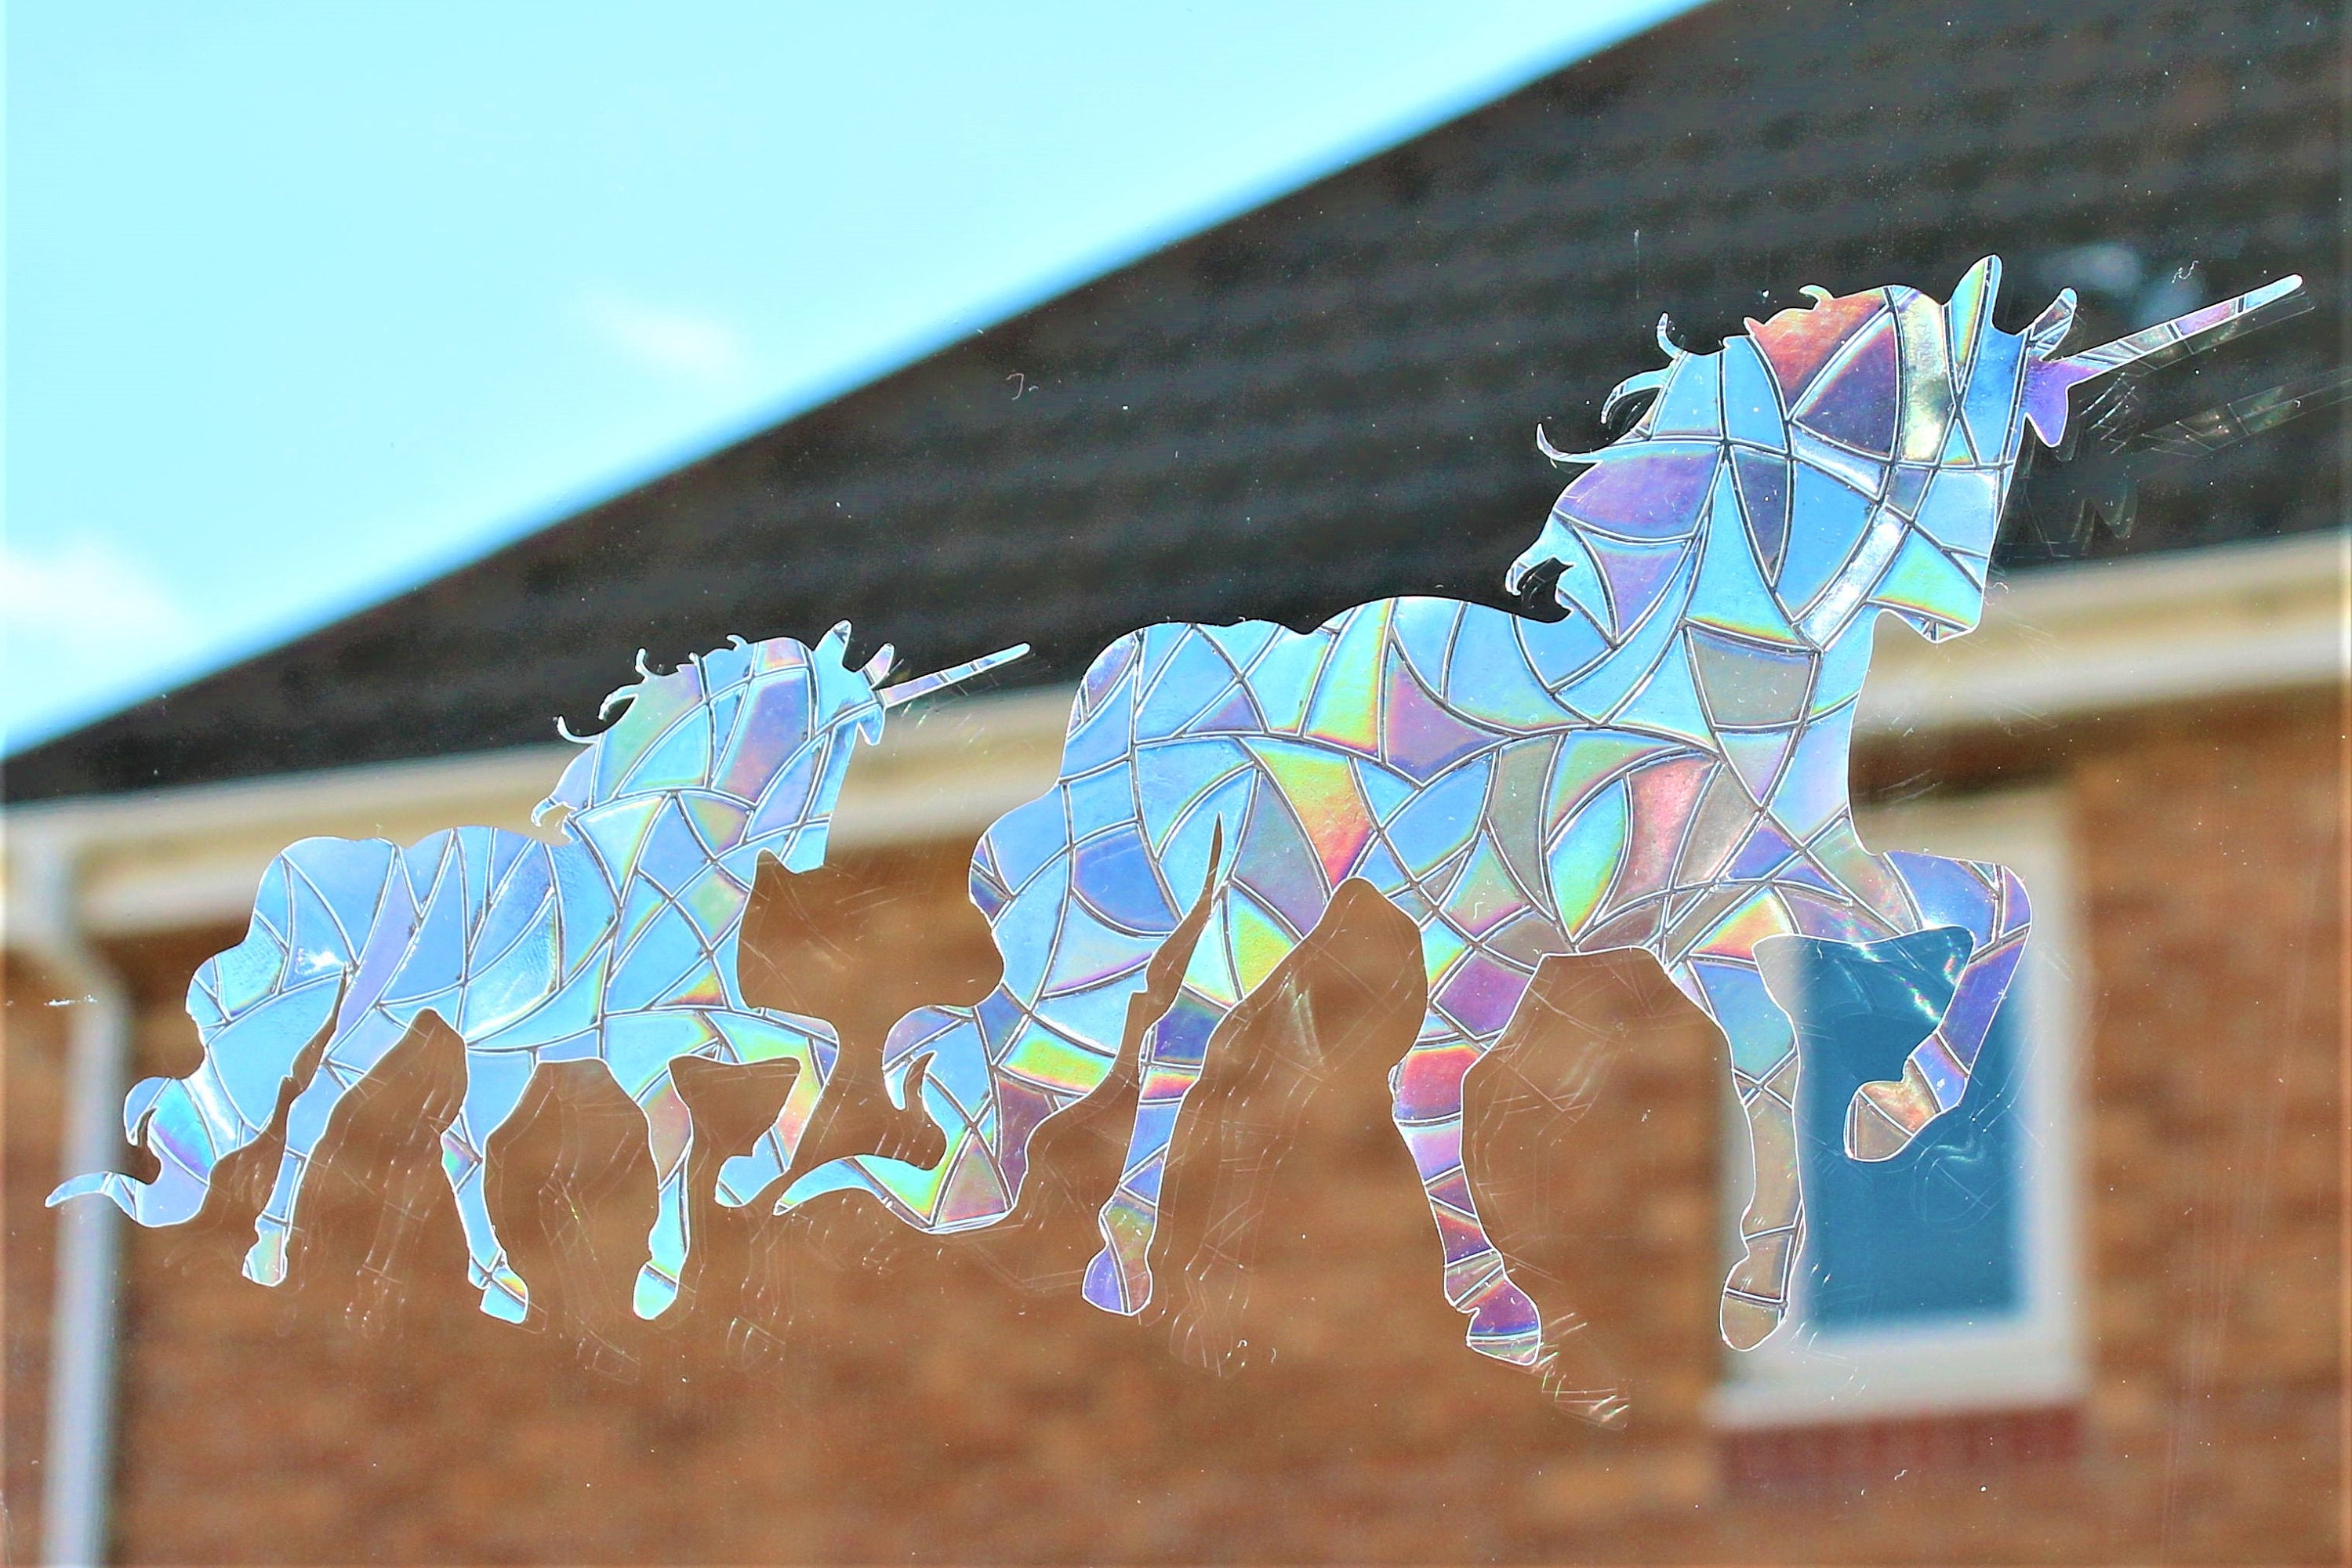 Buy 3 Unicorns Suncatcher Sticker Rainbow Window Film Clings Static Rent  Home Decoration.car Accessory,rainbow Maker for Home,office Vinyl Decal  Online in India 